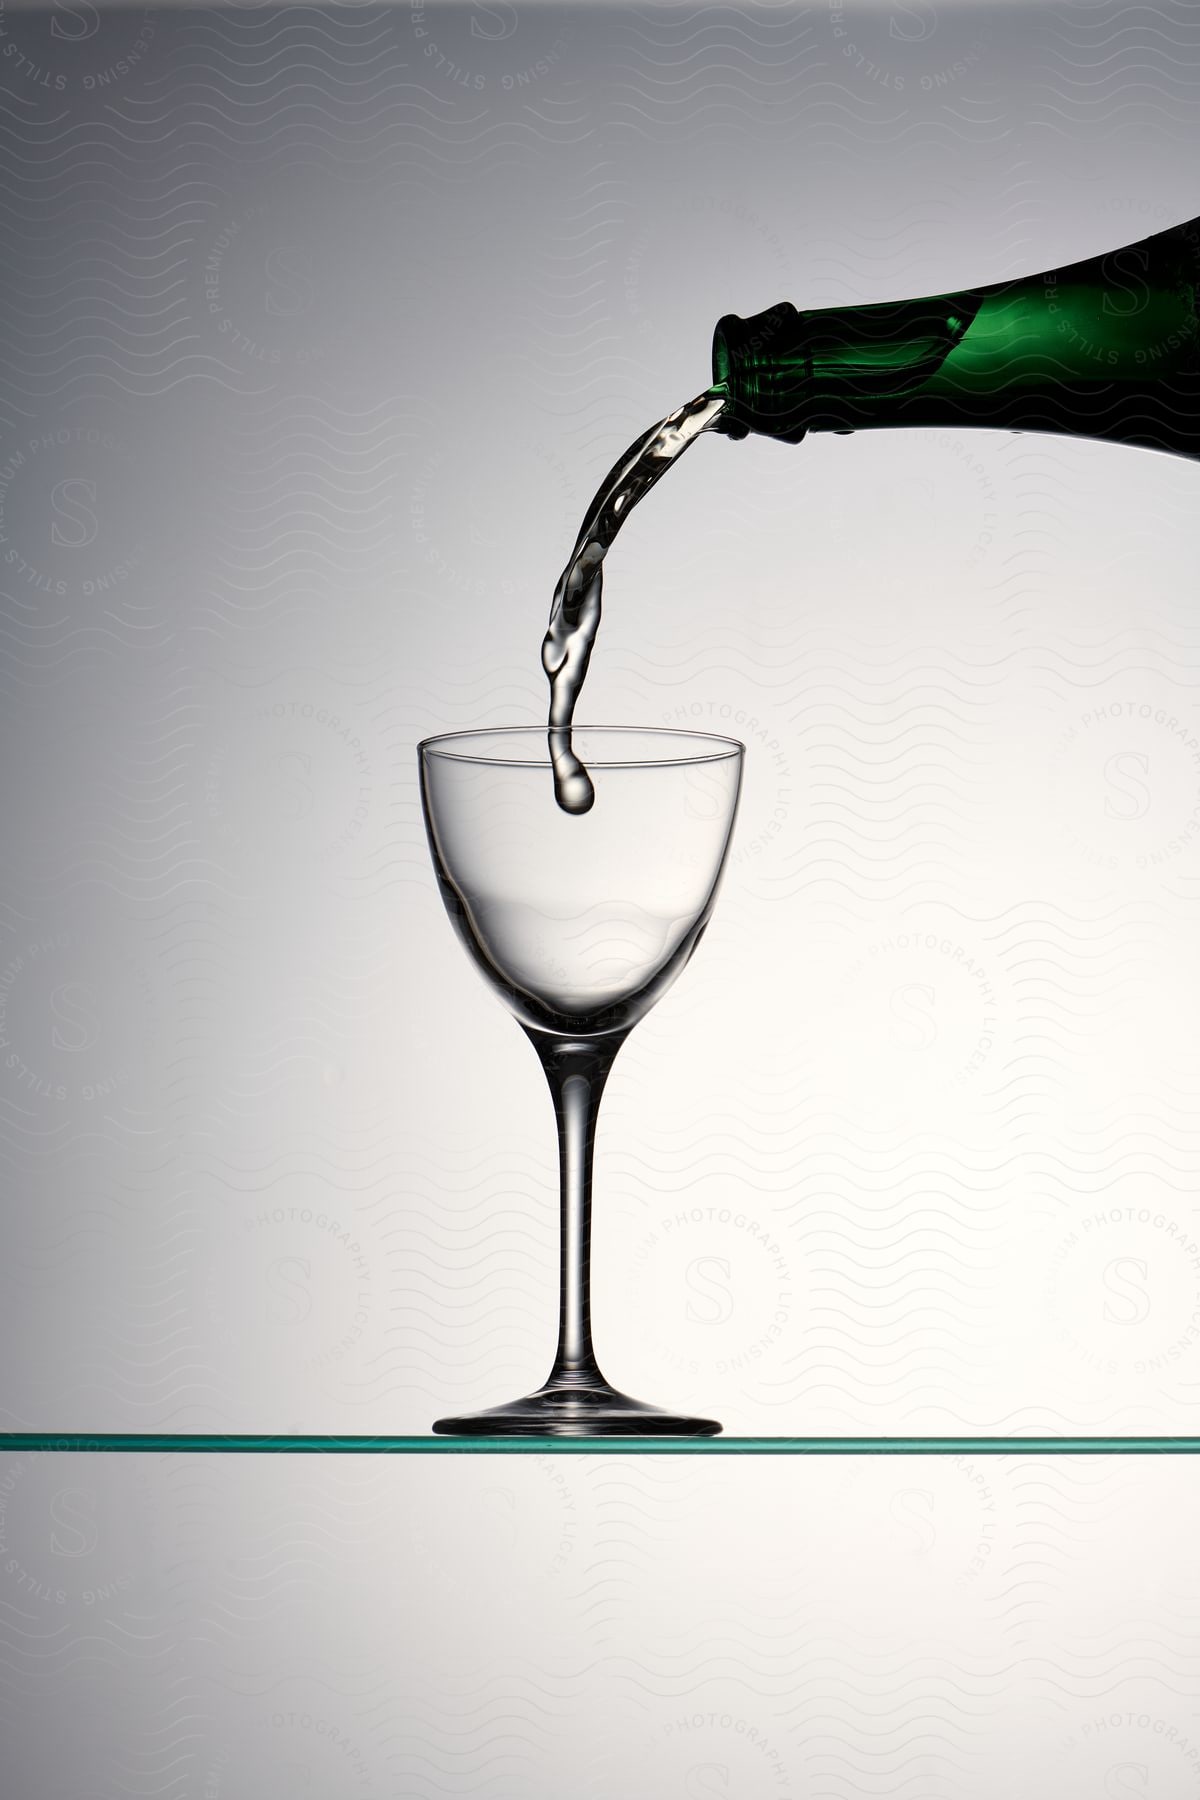 Pouring liquid from a green bottle into a crystal wine glass.